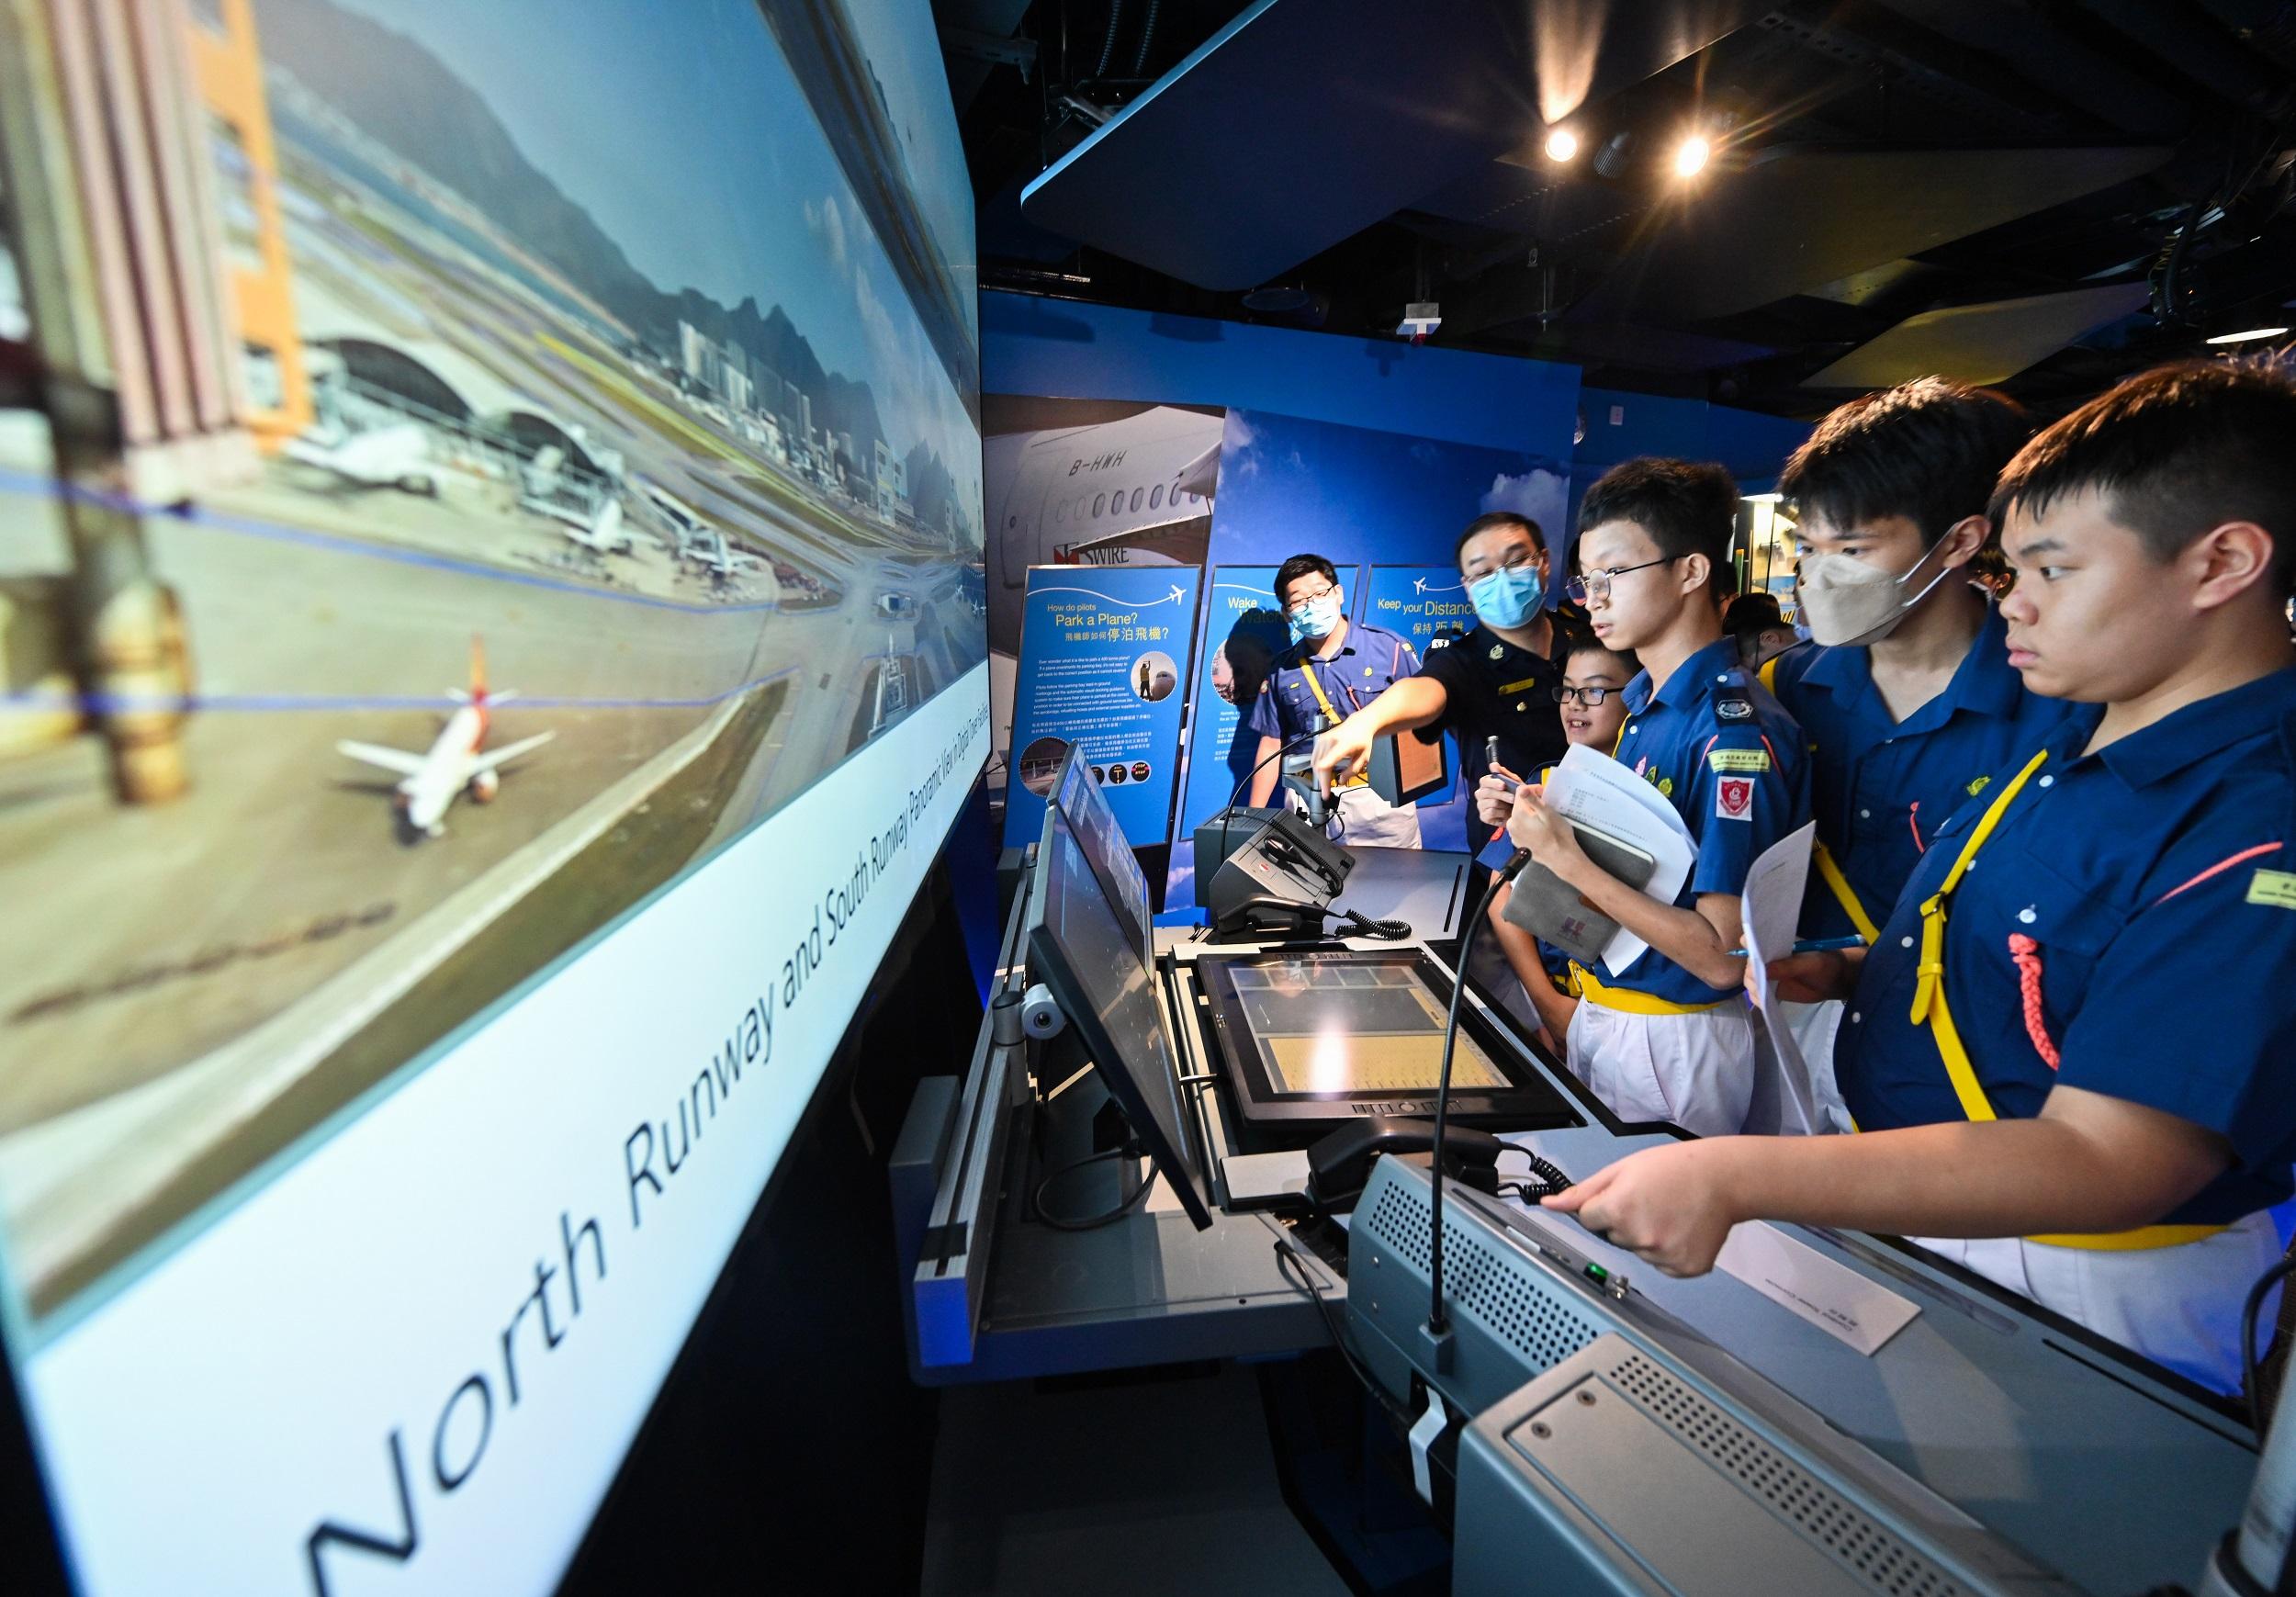 The Launching Ceremony of the "Aviation Safety Knowledge Badge Scheme" under the "Youth in Aviation"Programme jointly organised by the CAD and the Hong Kong Road Safety Patrol took place at the CAD Headquarters today (November 11). Photo shows participants of the scheme visiting the CAD Aviation Education Path guided by a docent.
